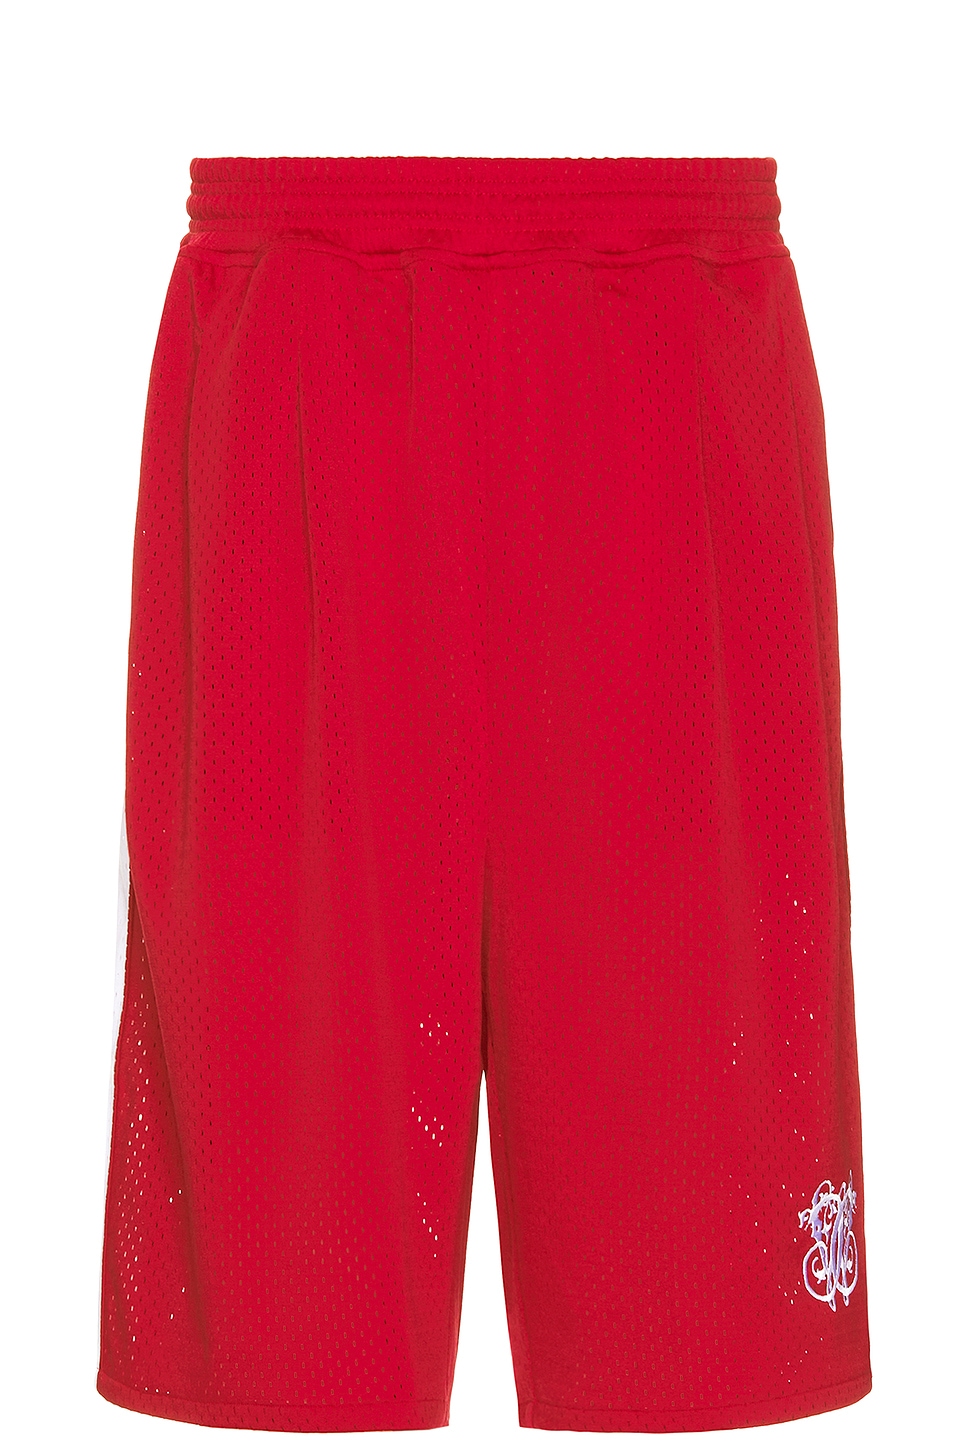 Image 1 of Willy Chavarria Tacombi Pleated Basketball Shorts in Red & White